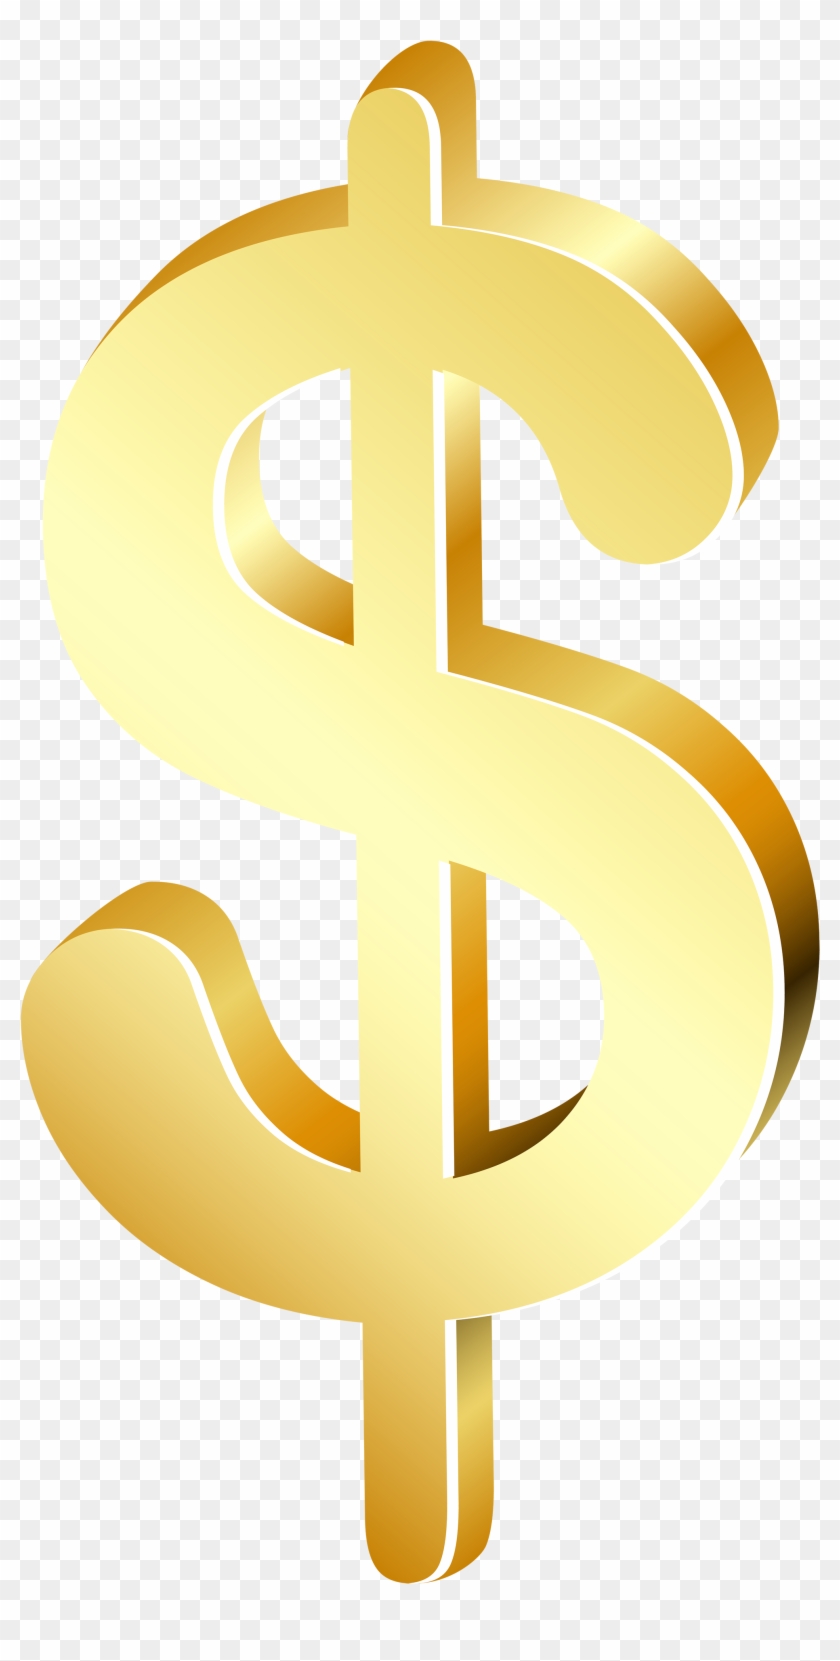 Dollar Sign Png Clipart - Fundraising #220360